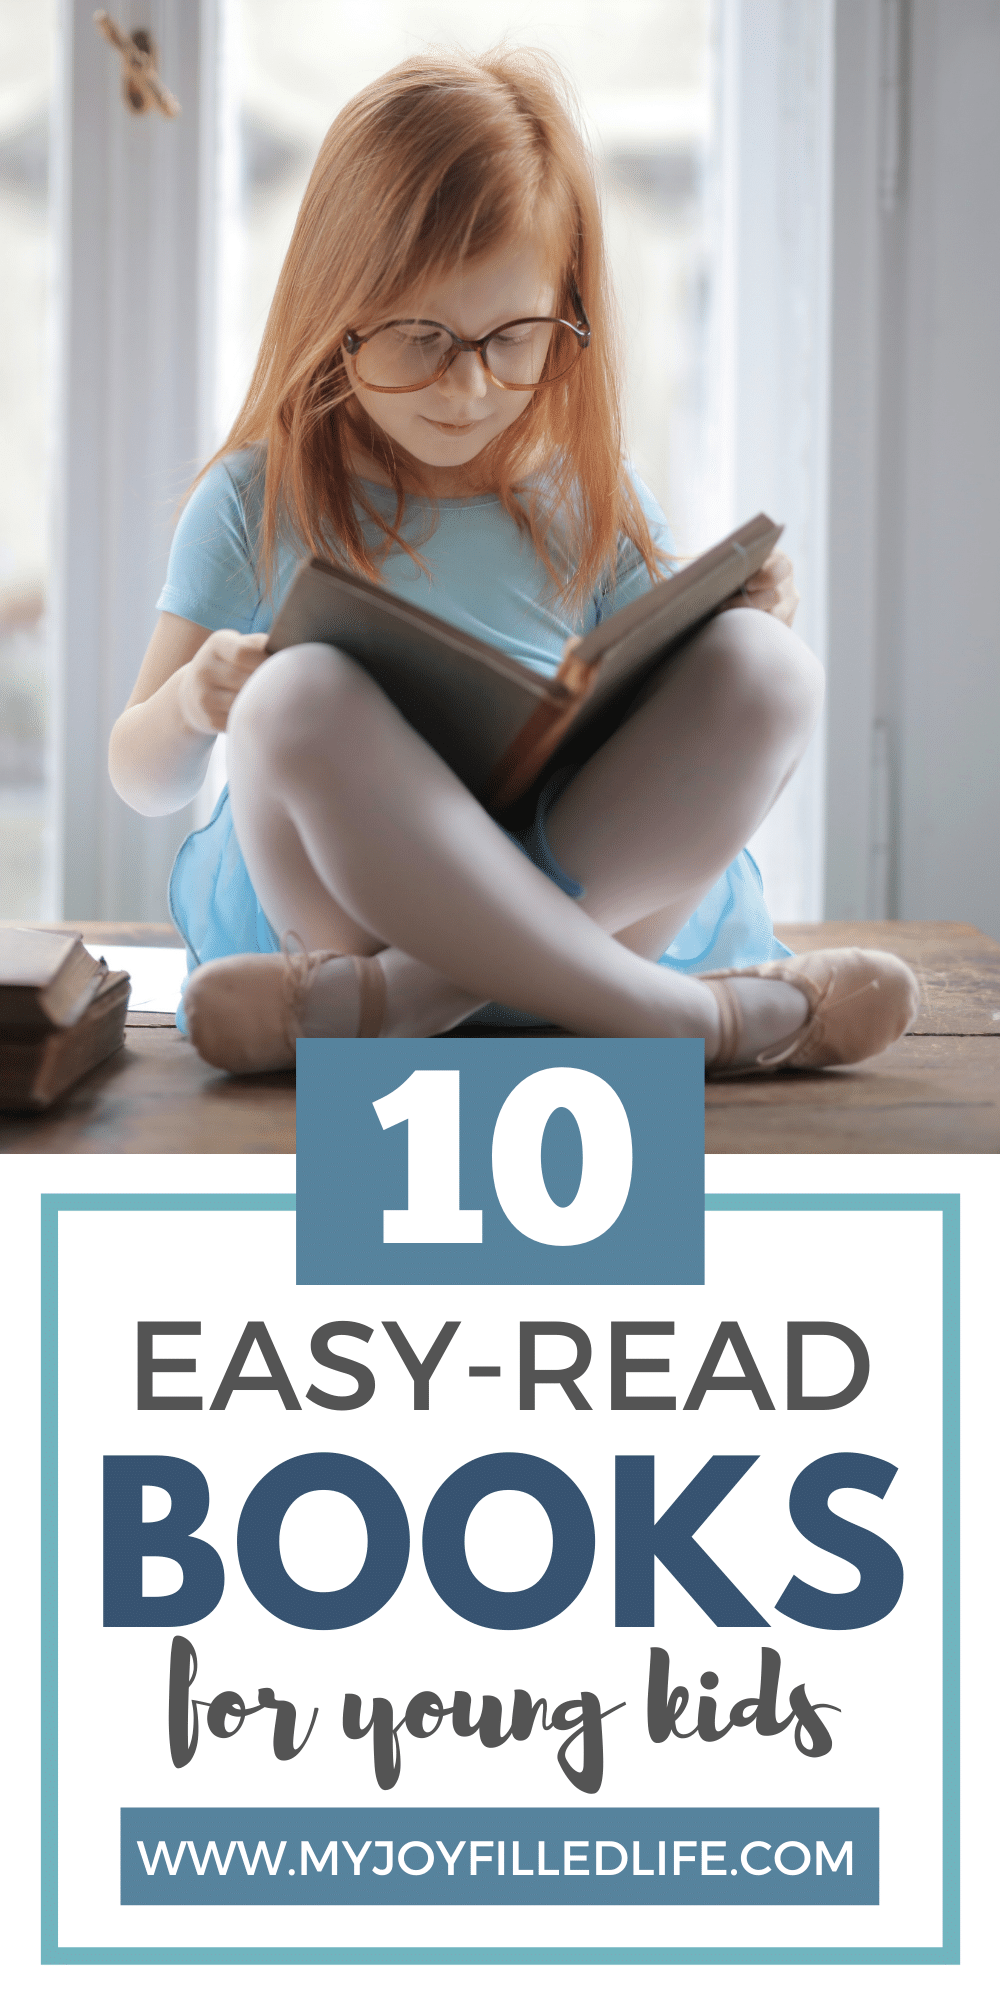 10-easy-books-to-read-for-young-kids-my-joy-filled-life